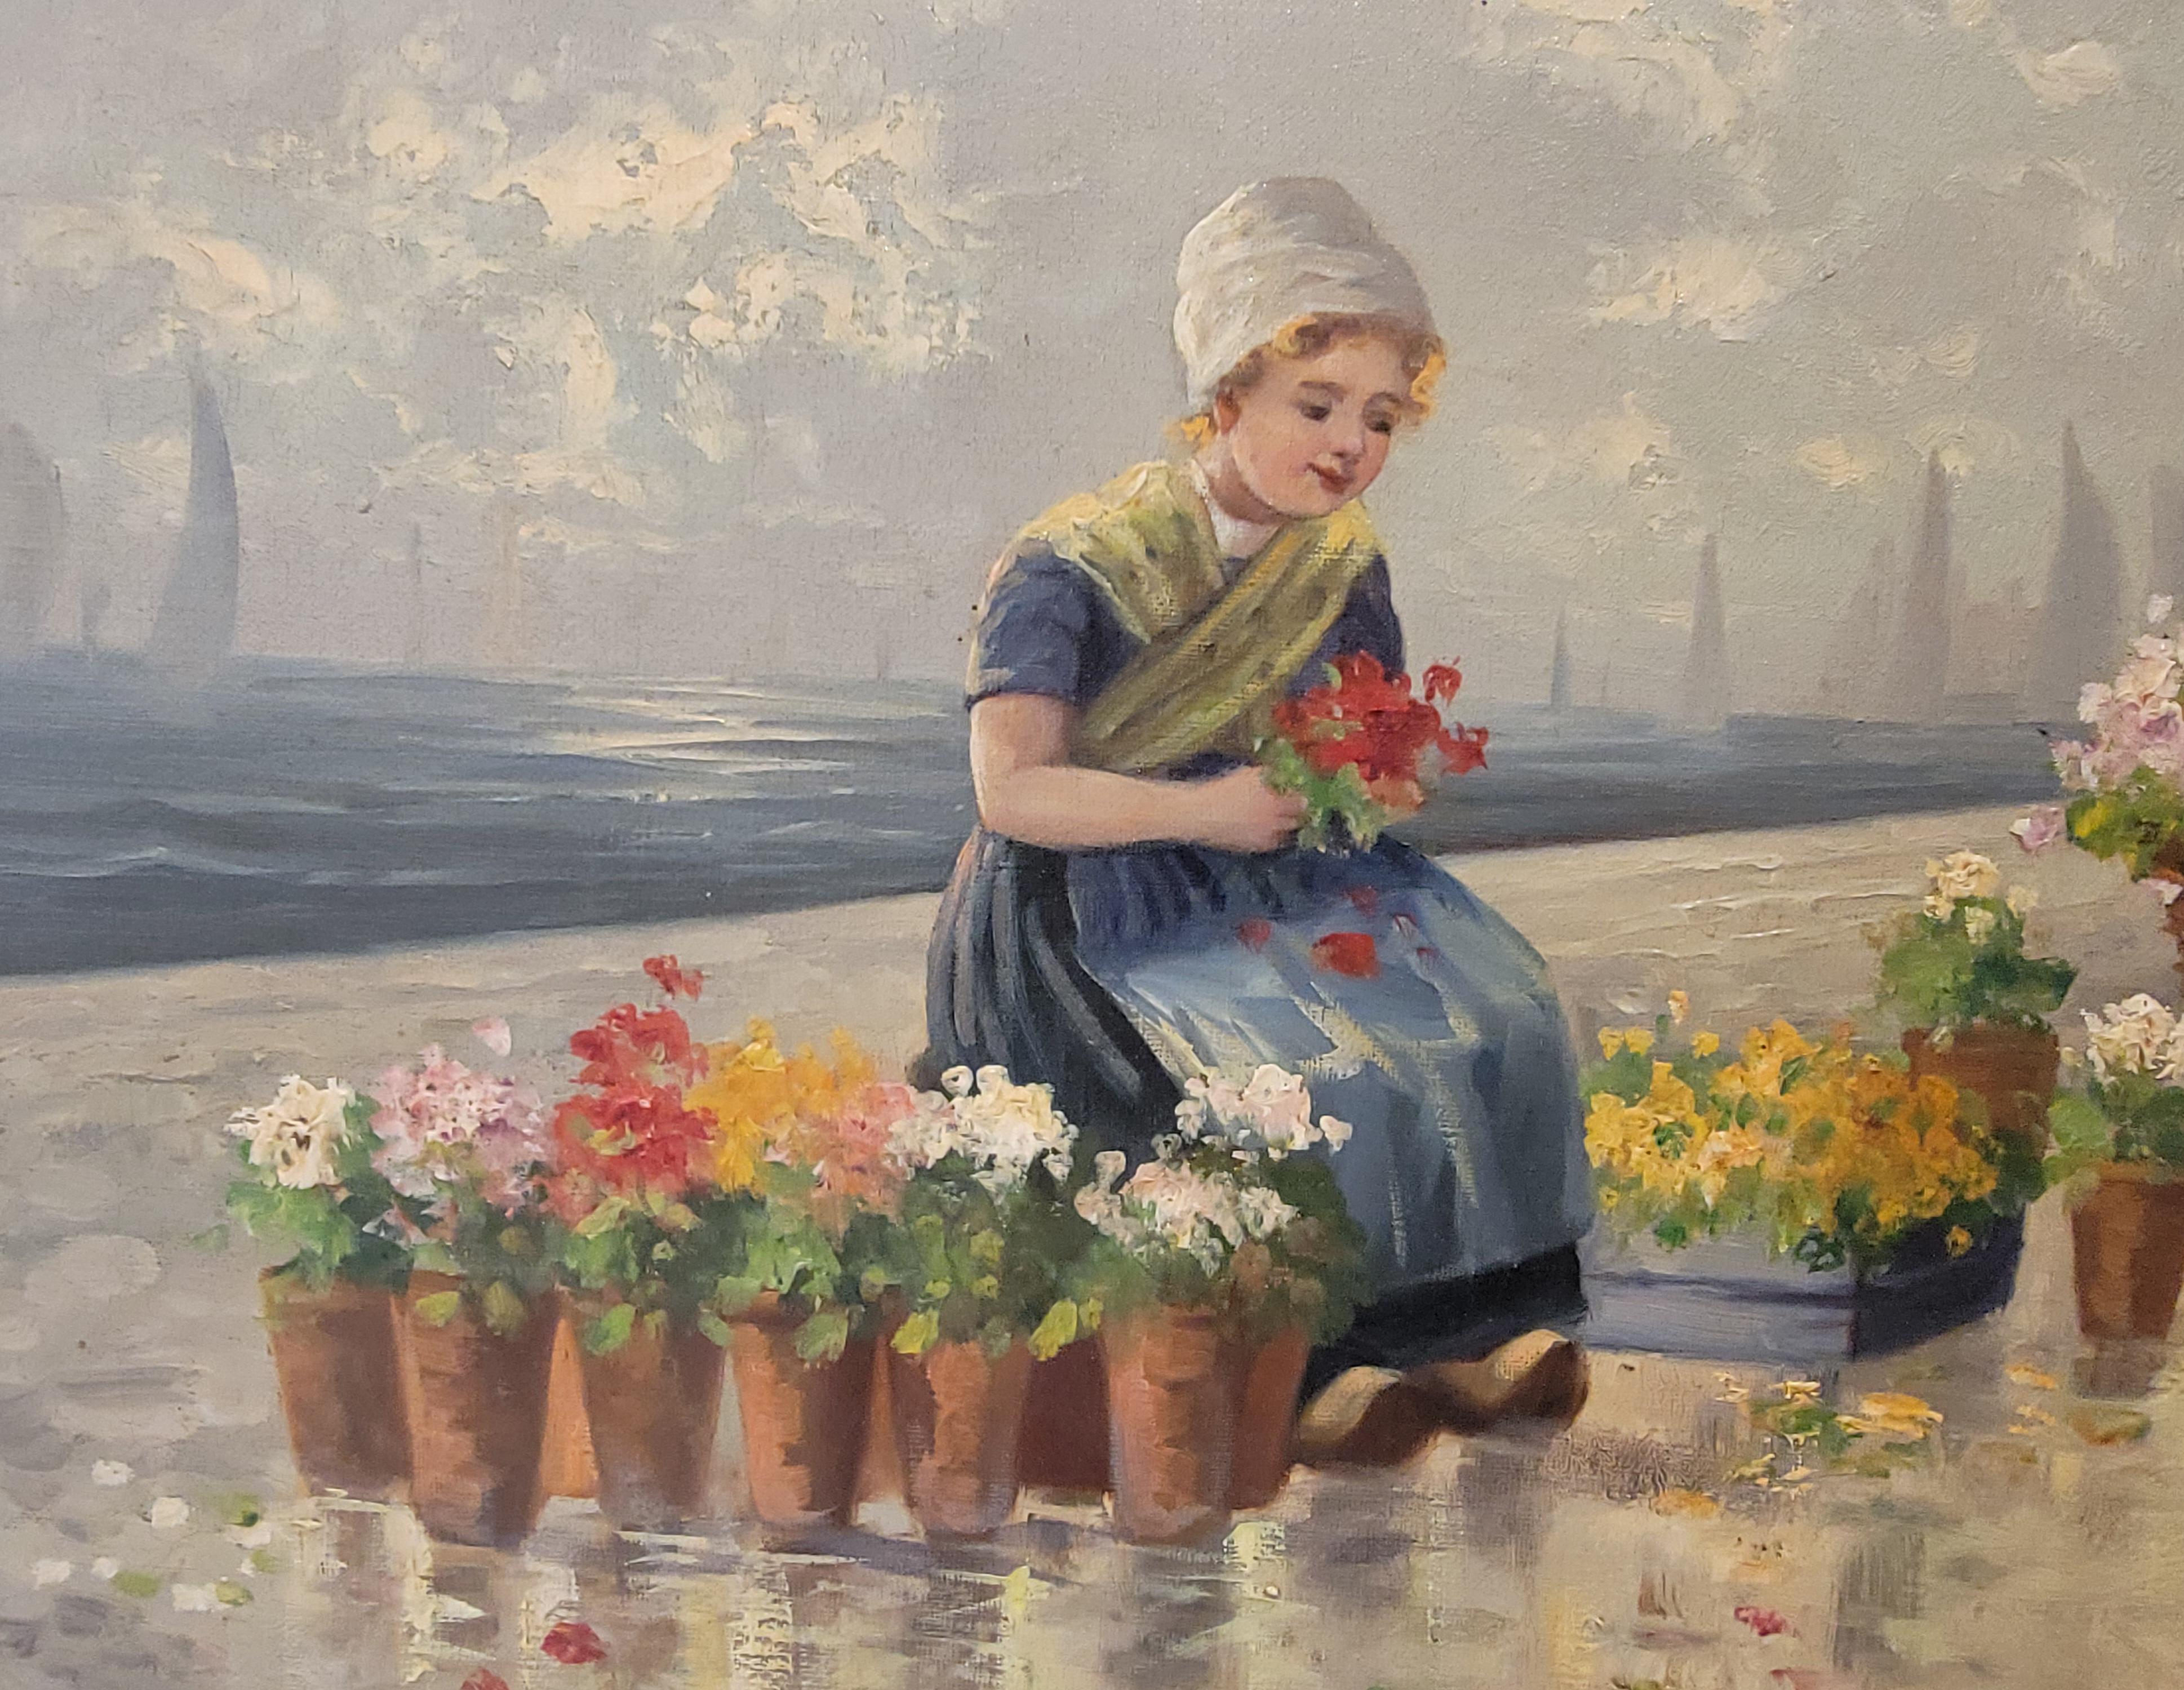 Early 20th century Dutch oil painting on canvas. Children vending cut flowers on a beach. Fine painting with exceptional luminescence. Canvas on original wood  stretches. Unframed. Measures approximately 21